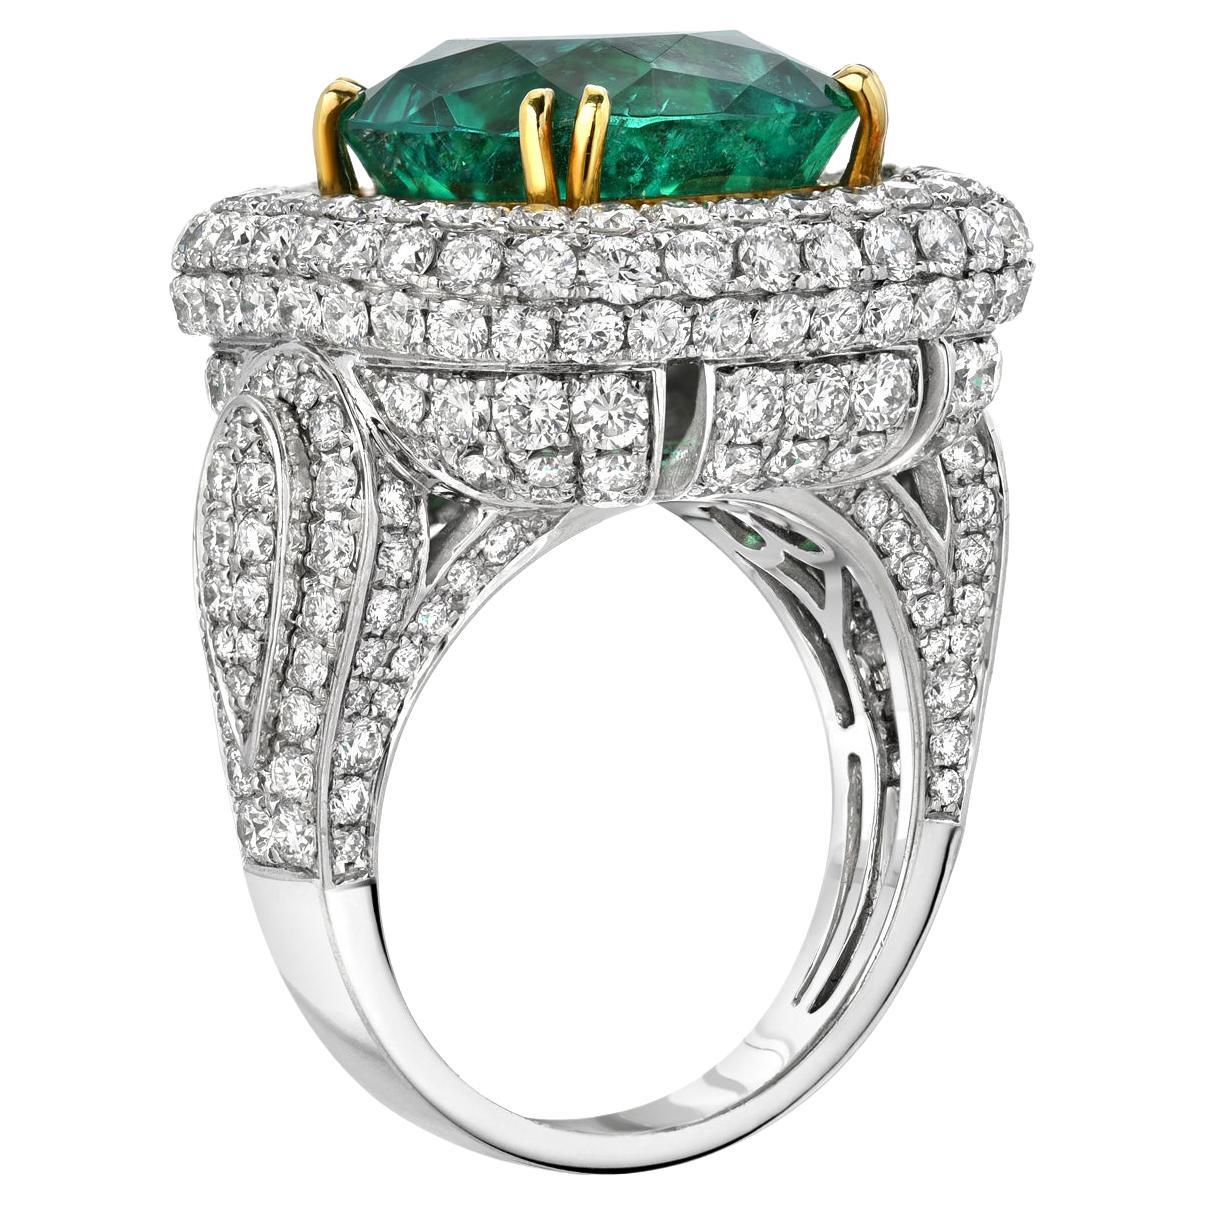 Colombian Emerald ring showcasing an extremely vibrant 9.07 carat cushion cut Emerald, hand set in this spectacular 4.76 carat diamond, platinum and 18K yellow gold setting.
The Gubelin gem certificate is attached to the image selection for your